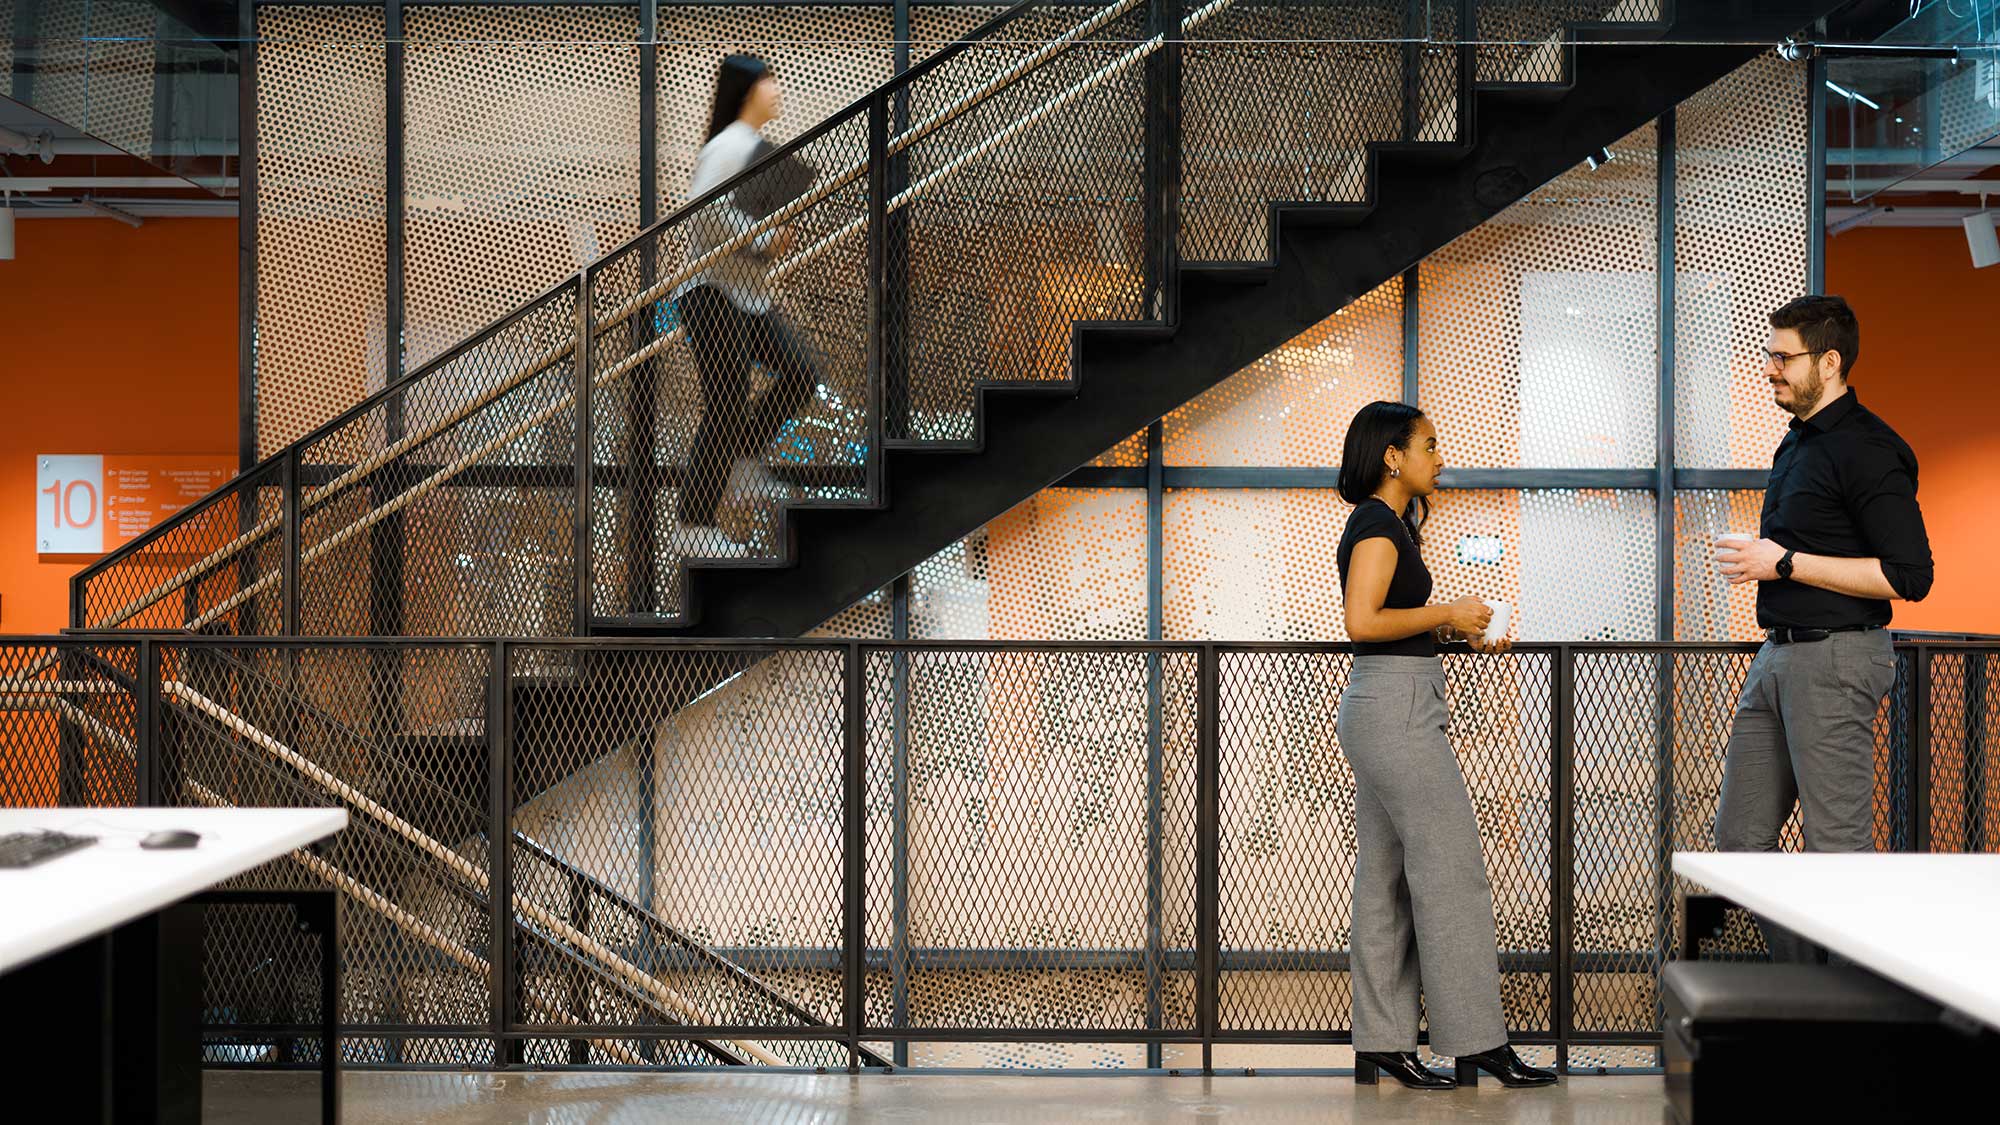 Two people talking in front of a staircase in an office